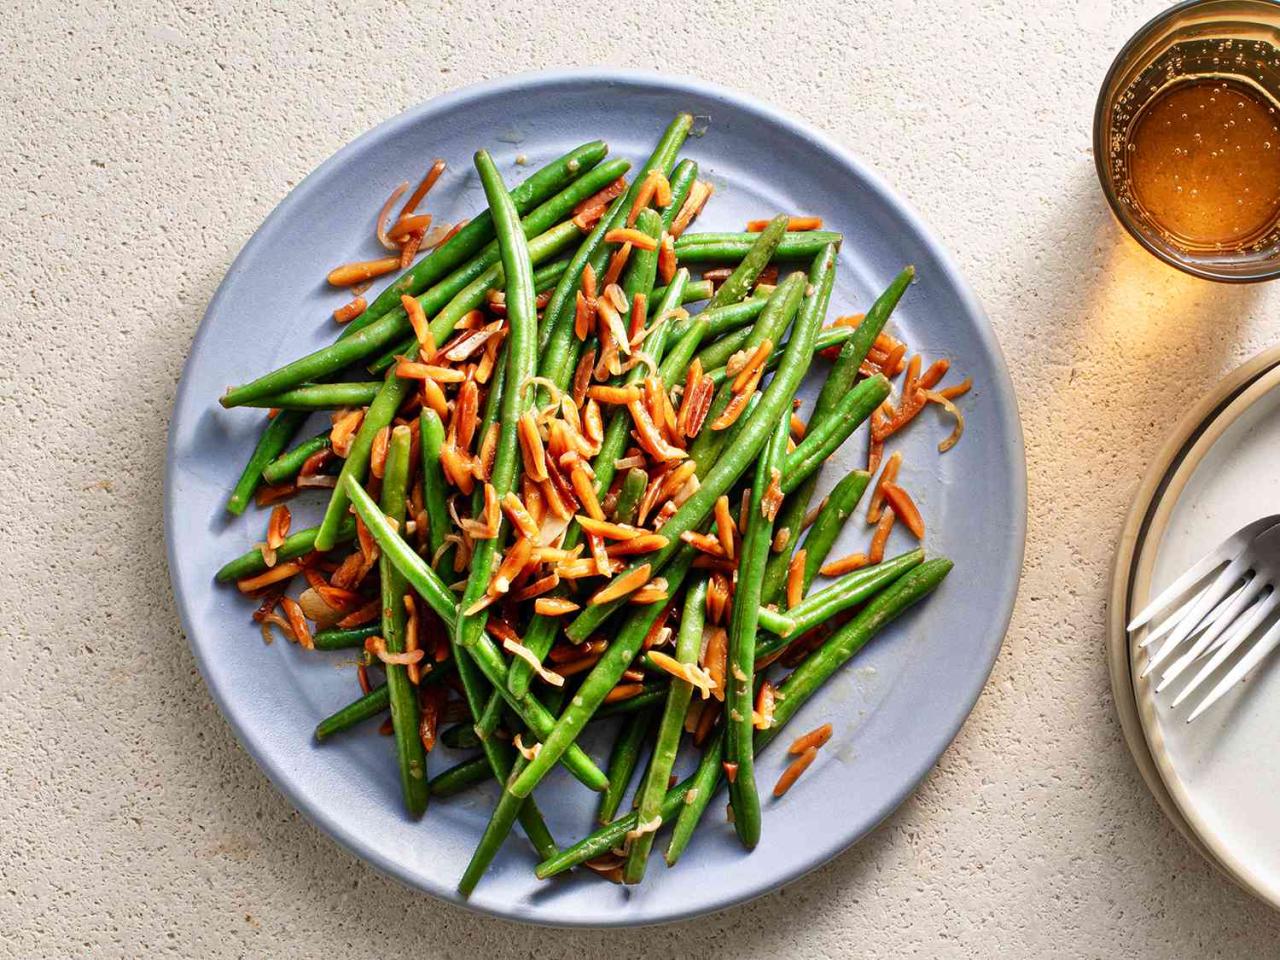 Haricots Verts Amandine (French-Style Green Beans With Almonds) Recipe